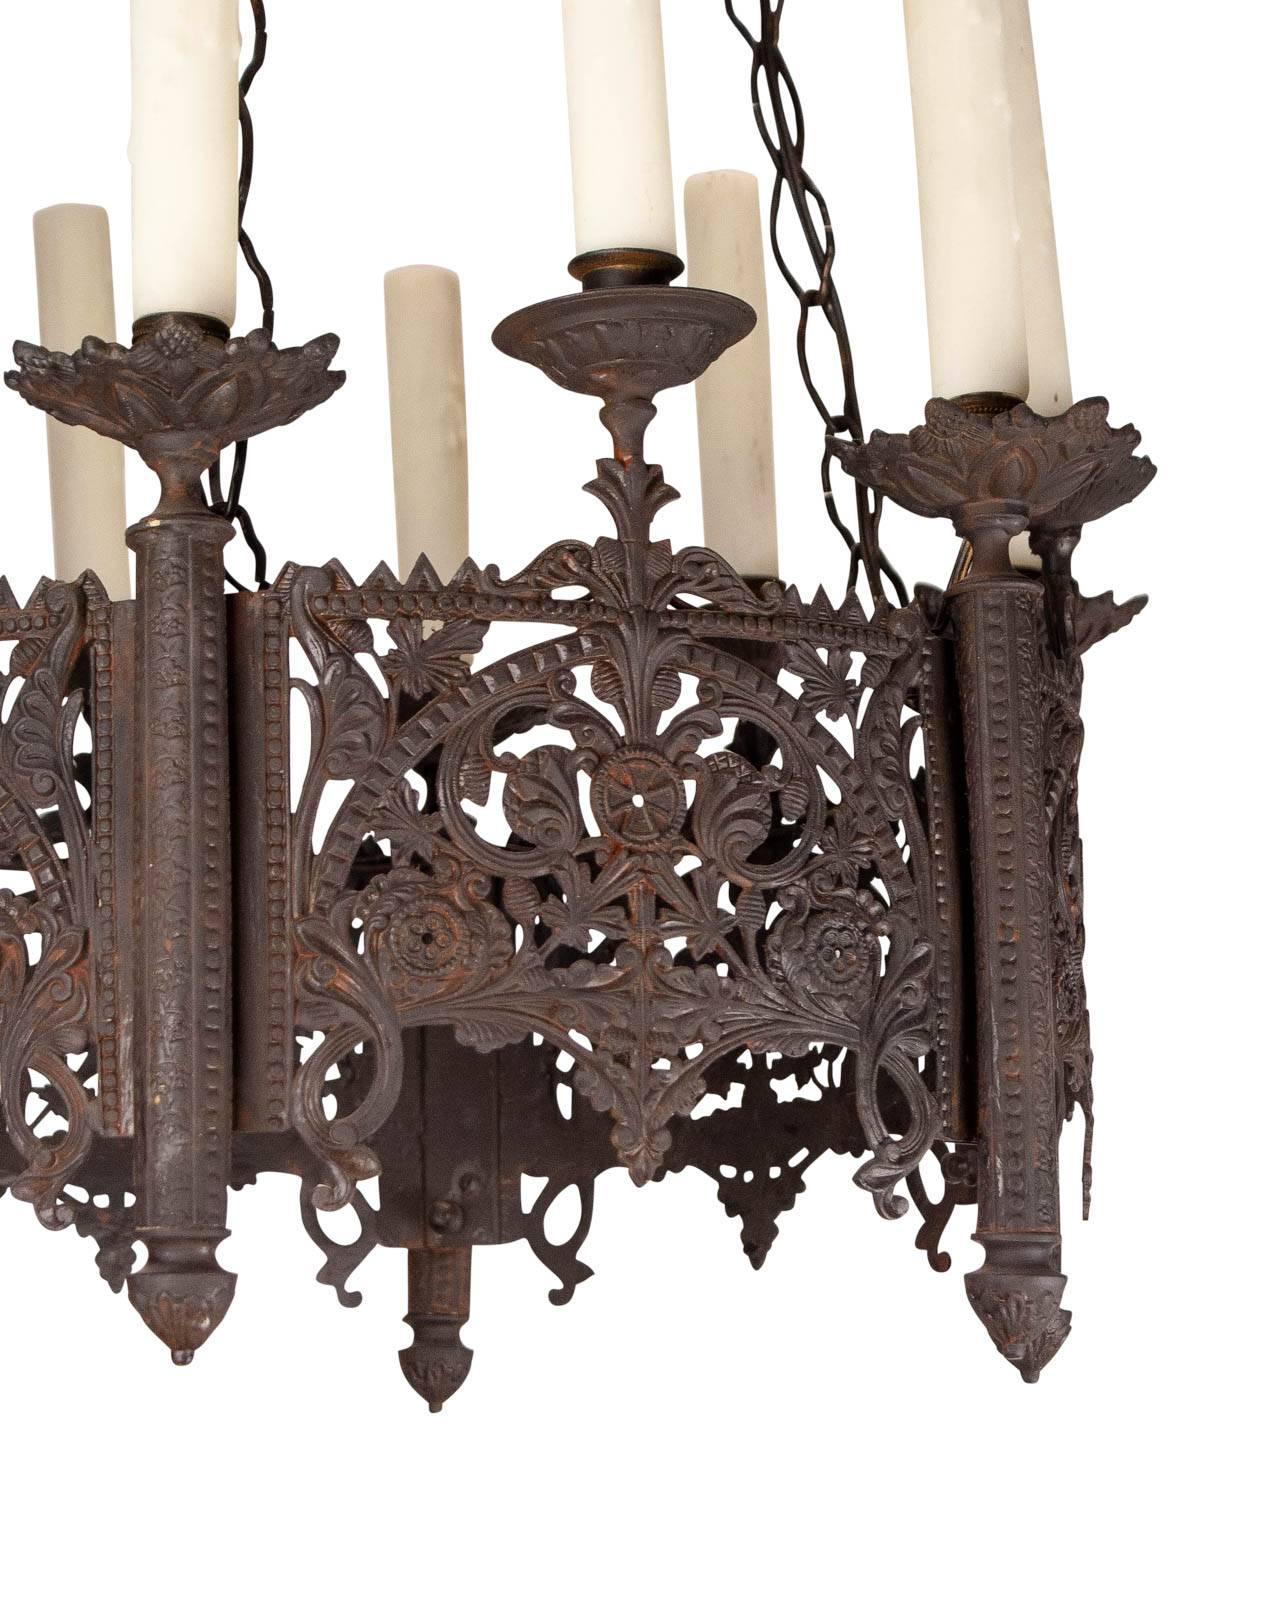 A handsome and large Gothic style metal chandelier made in during the last part of the 19th century. Recently wired with new candle covers.